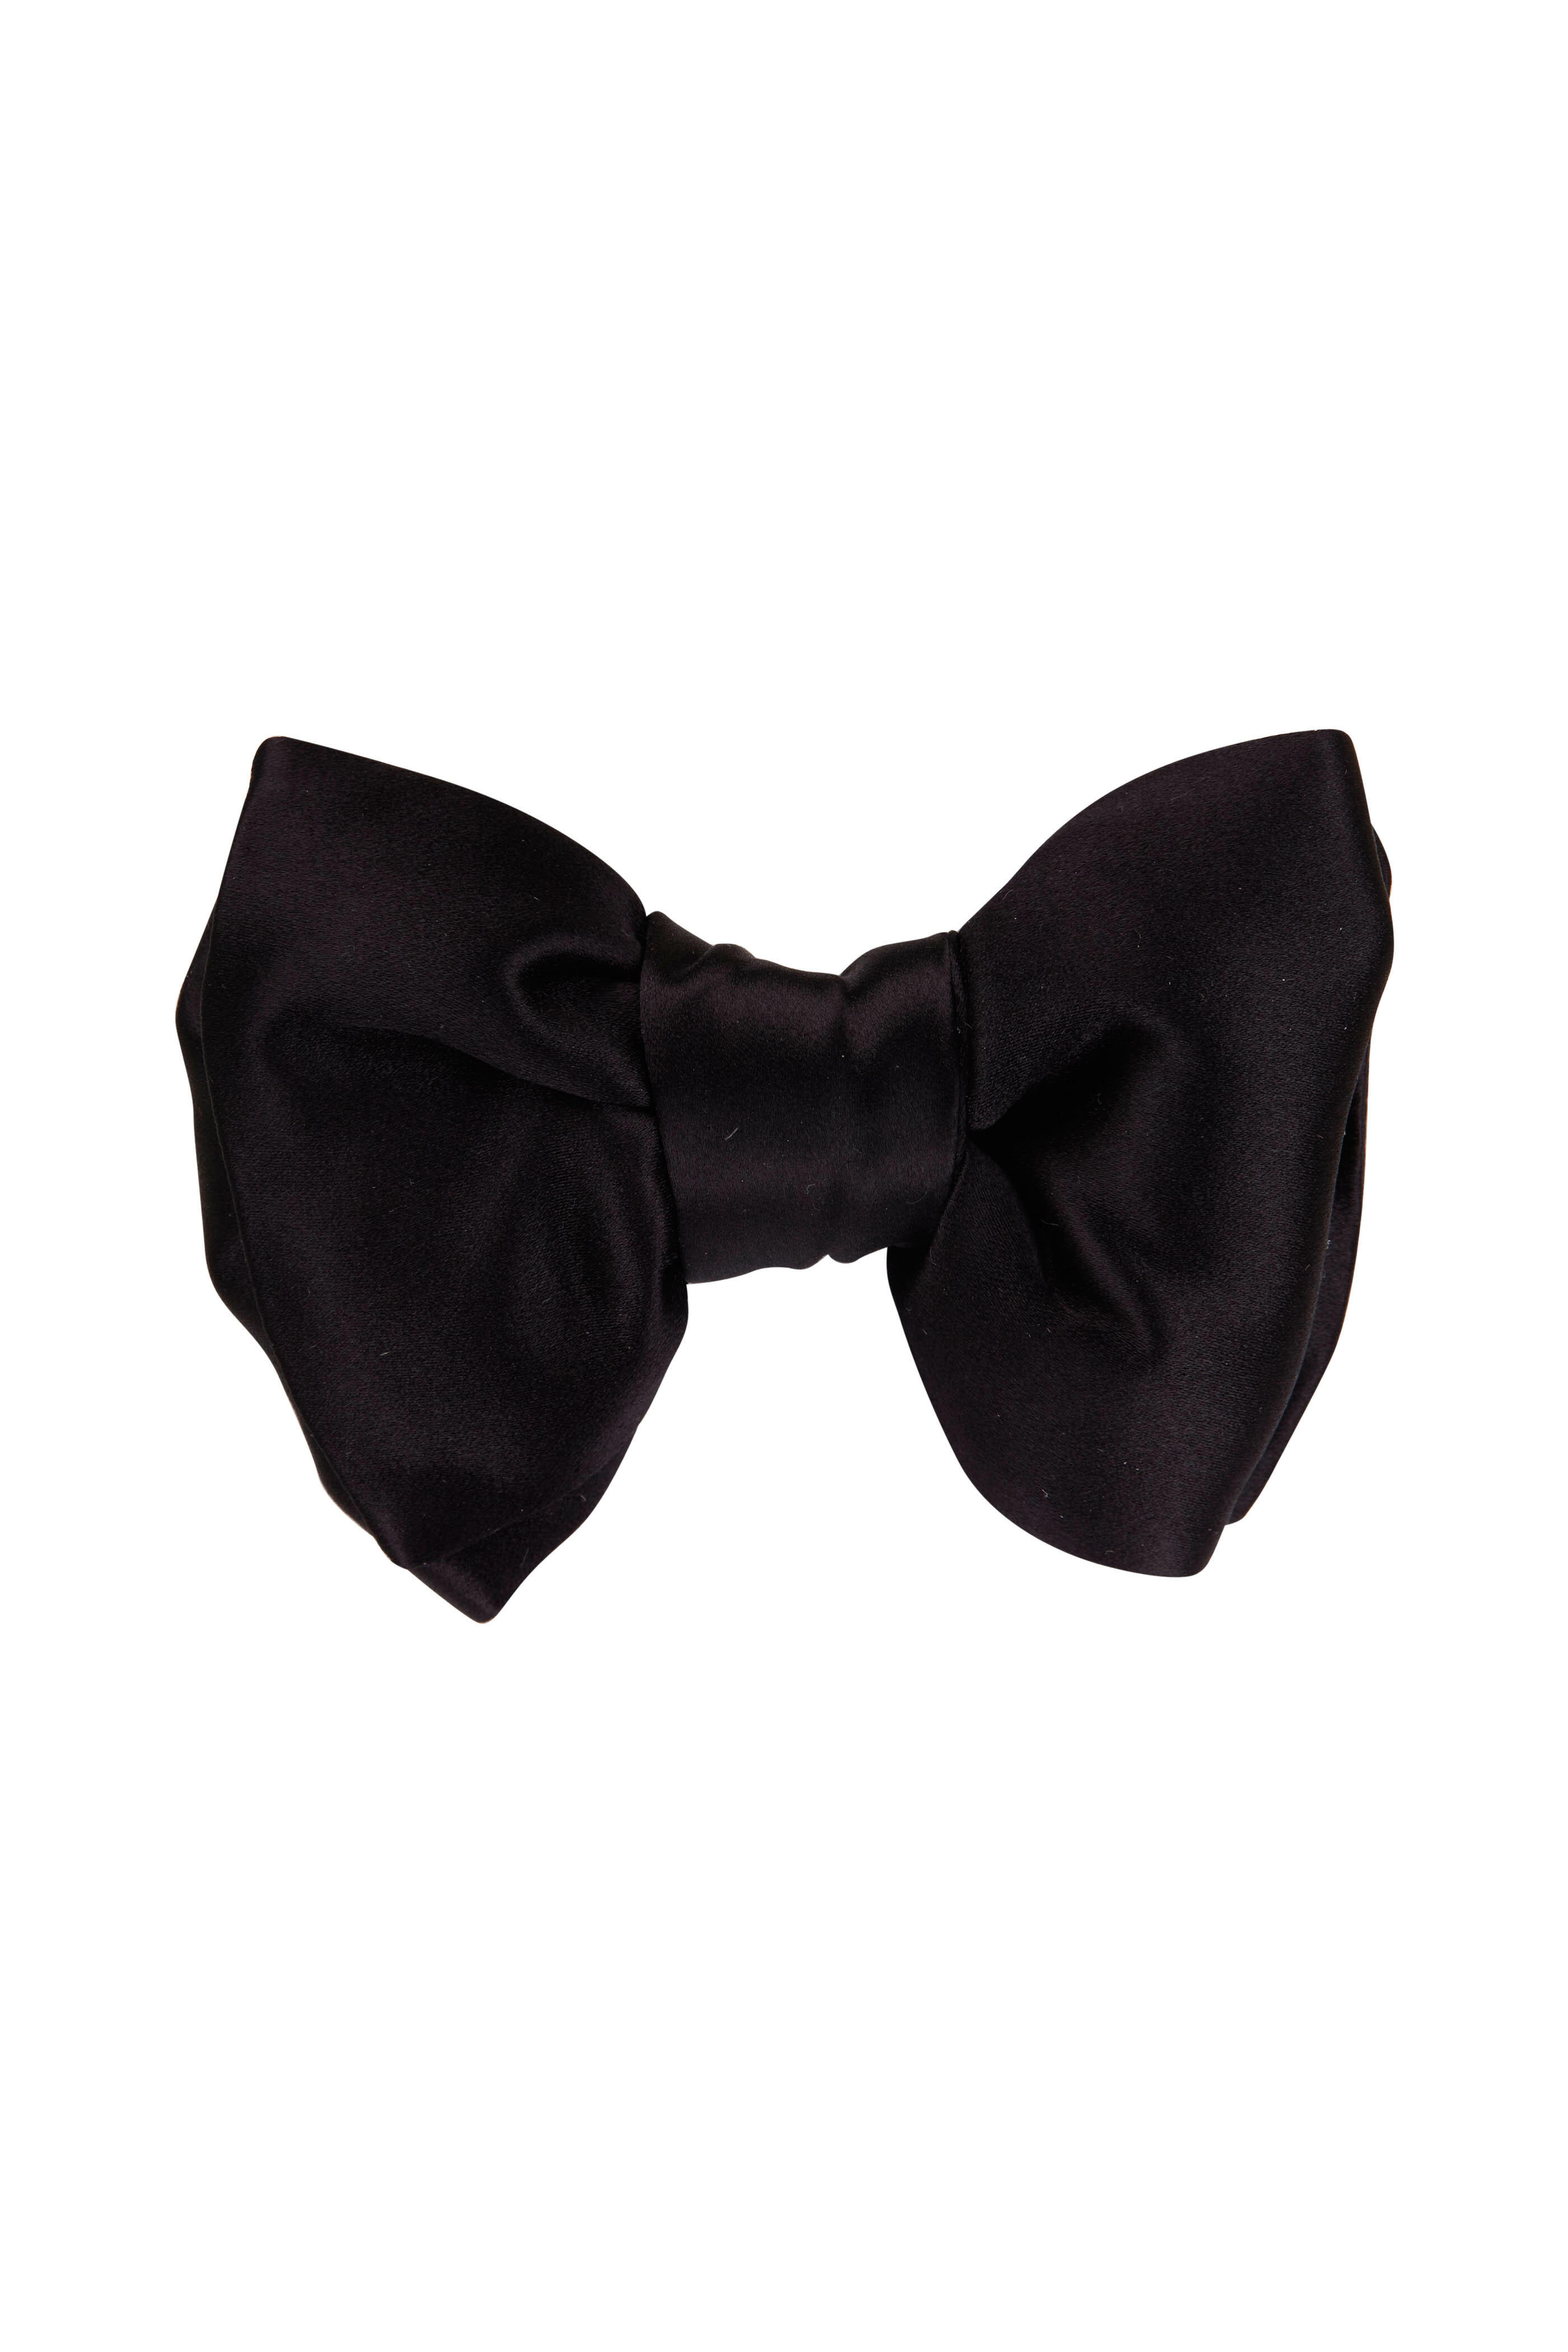 Tom Ford - Black Pre-Tied Bow Tie | Mitchell Stores